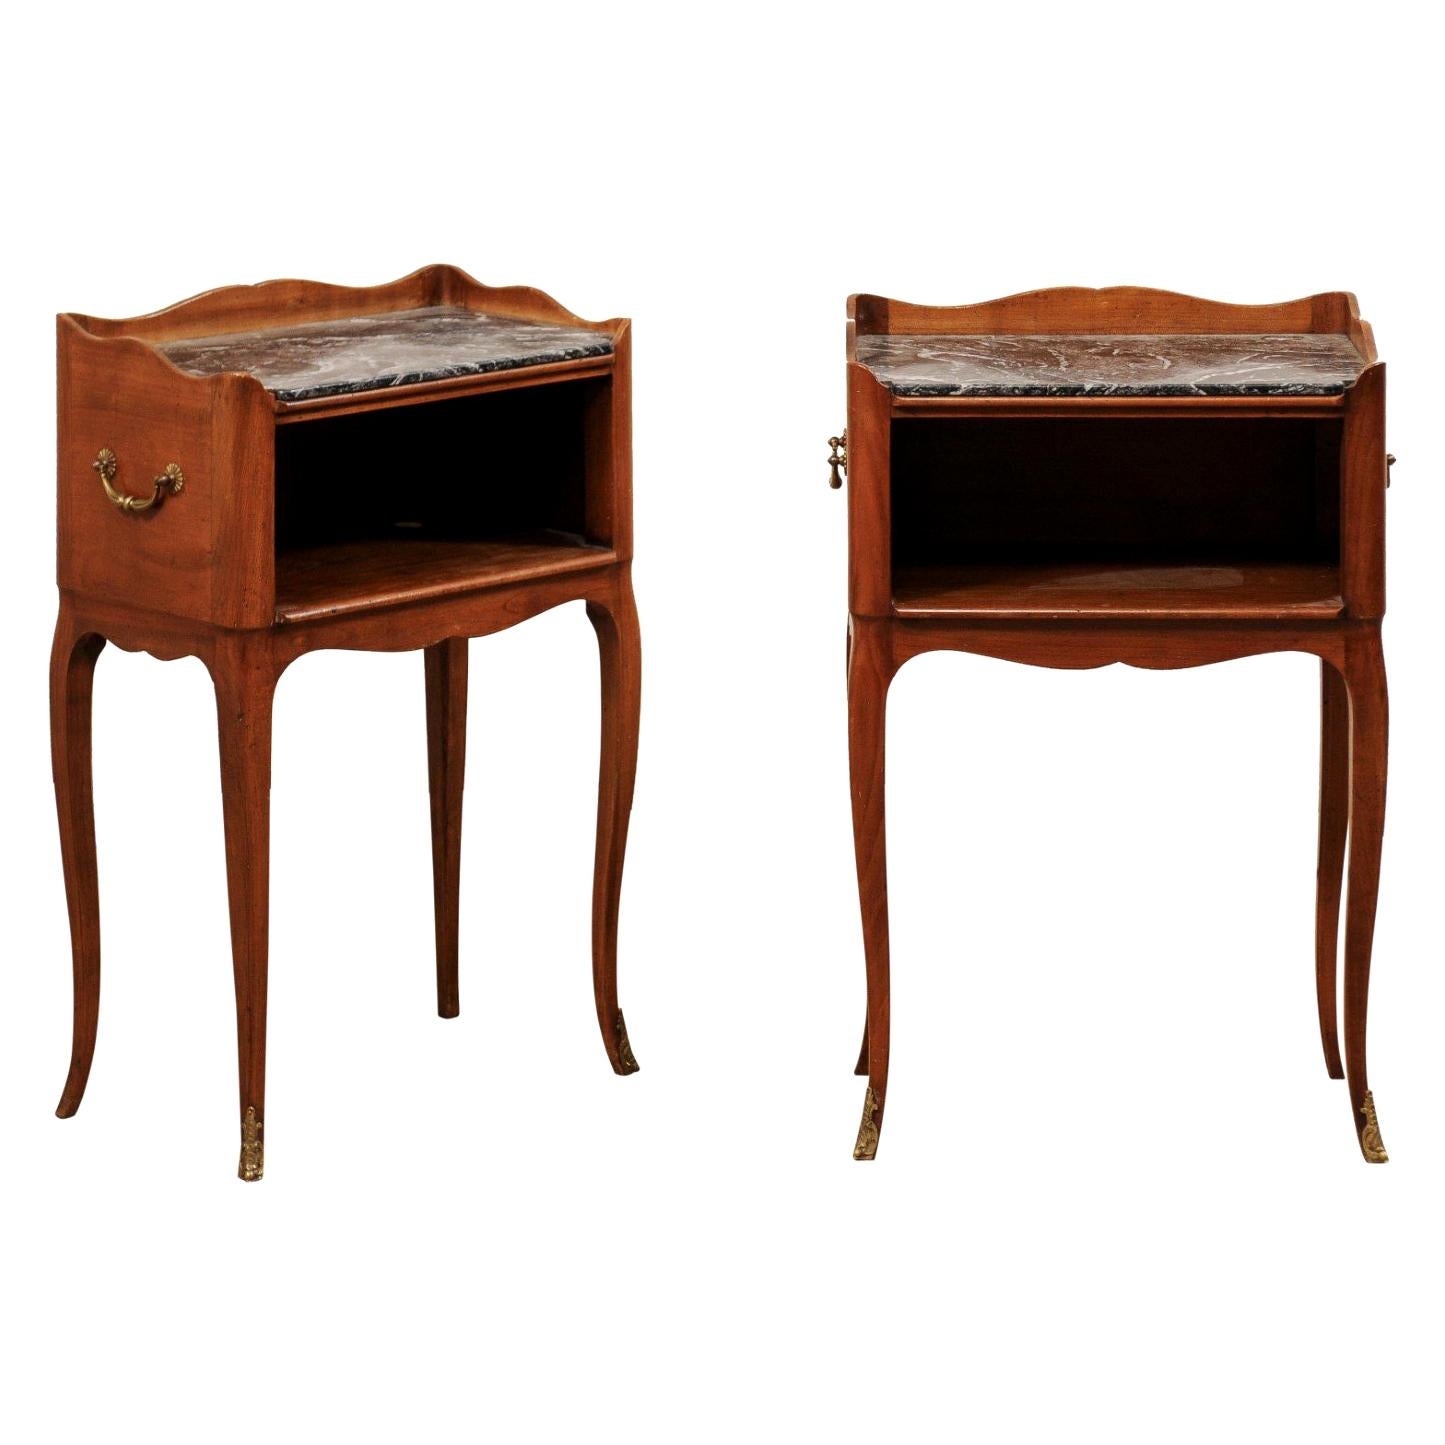 Pair of French Mid-20th Century Marble-Top Side Chests with Cabriole Legs